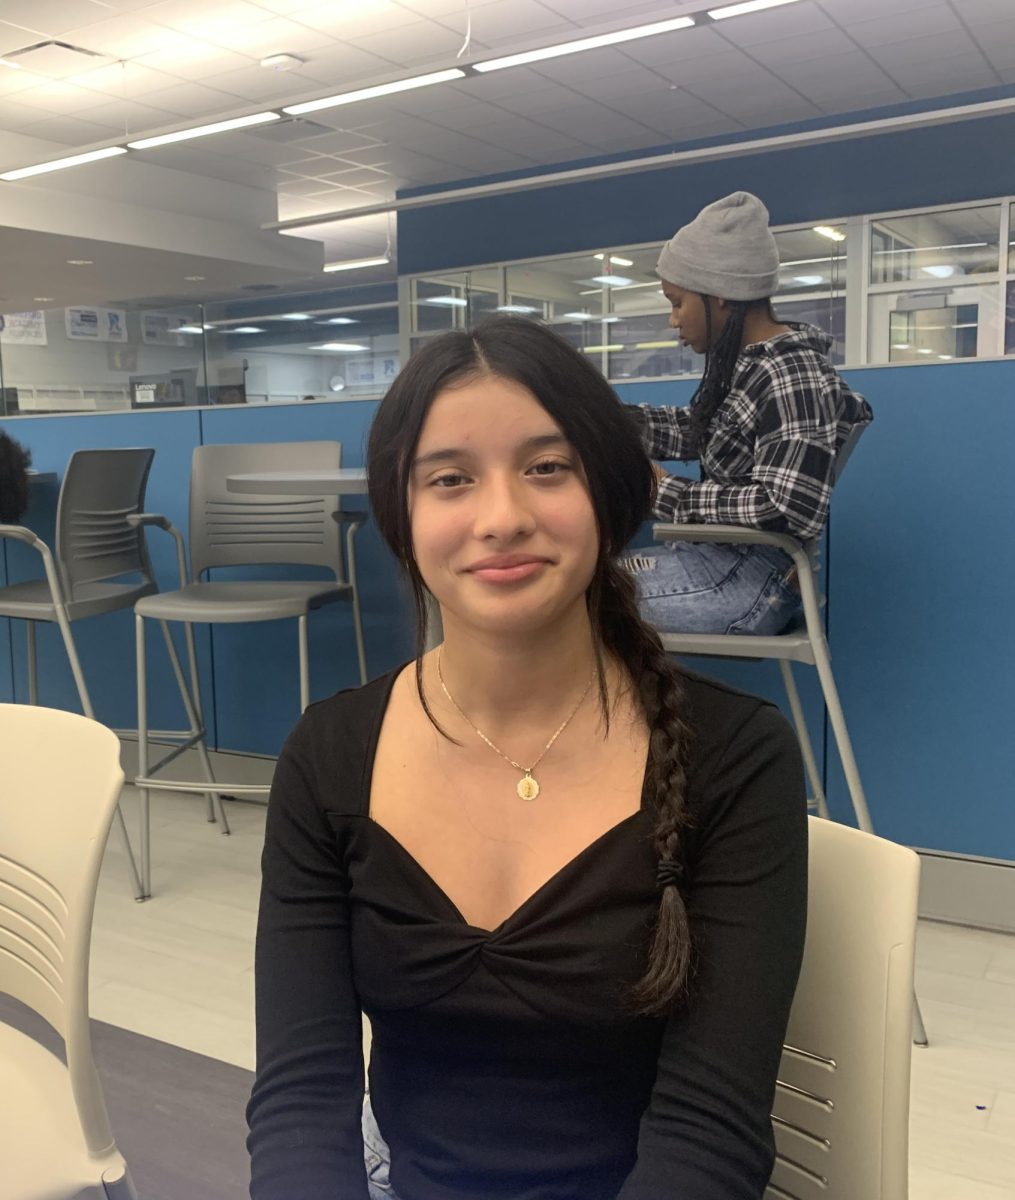 Bianca Hernandez, Freshman: “If I have an A in the class and I do bad on a test, it’ll bring it (the grade) down to a C. It brings your grade really far down. How are you supposed to bring it back up with just assignments? I mean, you can bring it up with another test grade, but it’ll be hard if you do bad on that test too. They should change the grading system to 50% tests and 50% assignments so it can be easier on students.”